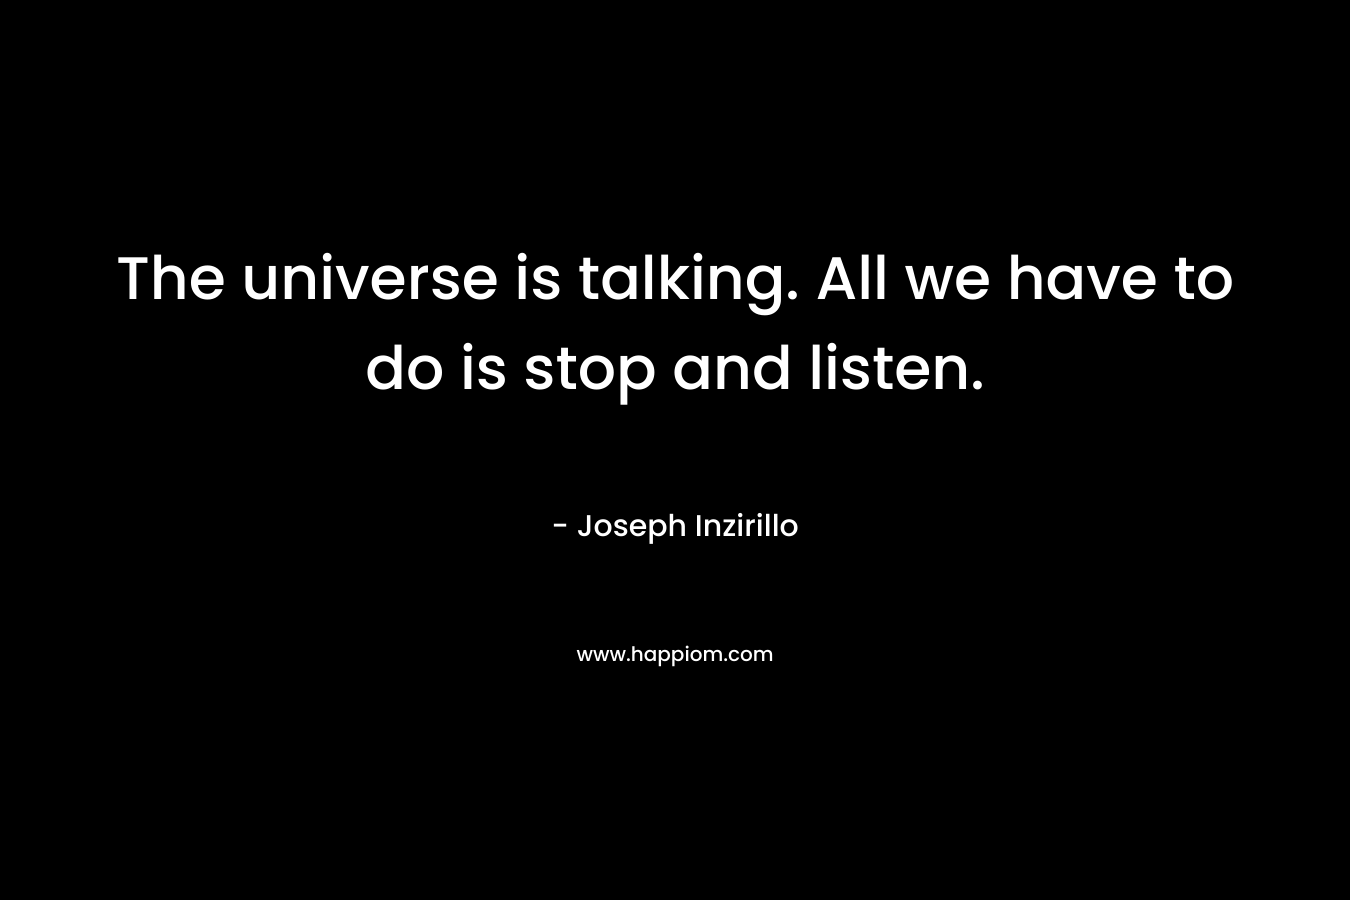 The universe is talking. All we have to do is stop and listen.